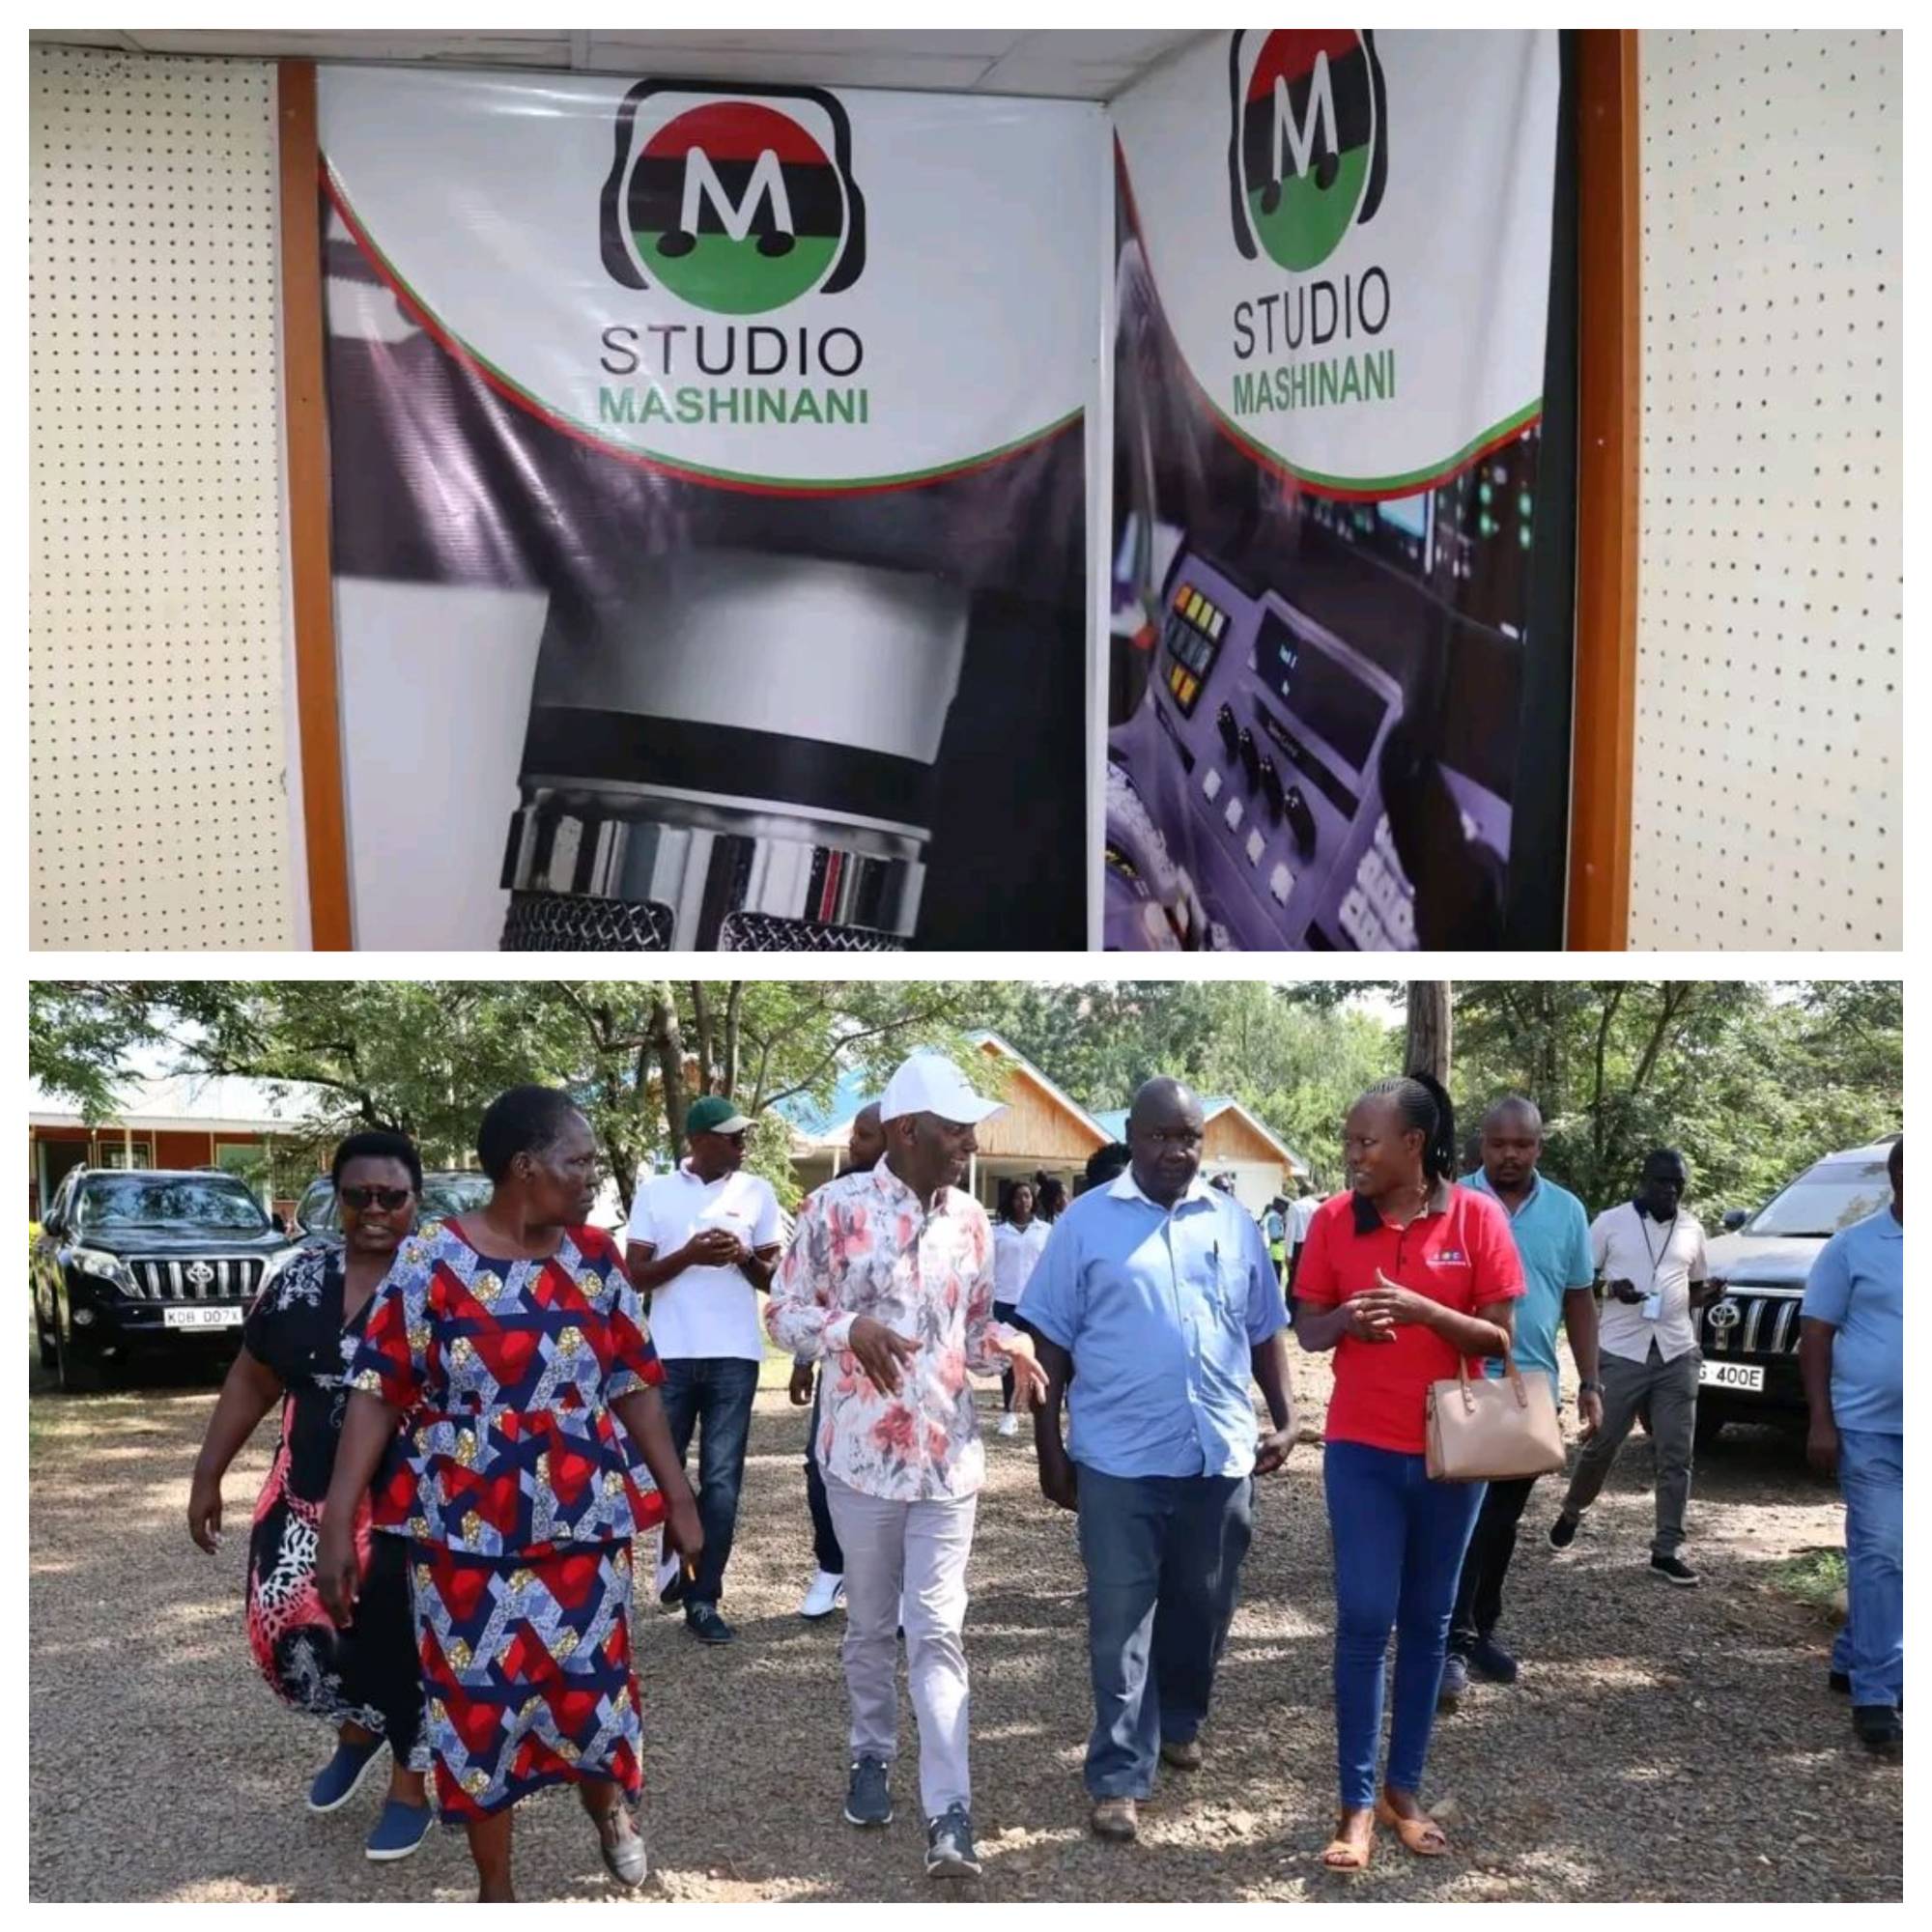 PARLIAMENTARY BROADCASTING COMMITTEE CONCLUDES WESTERN REGION INSPECTION TOUR WITH KISUMU VISIT